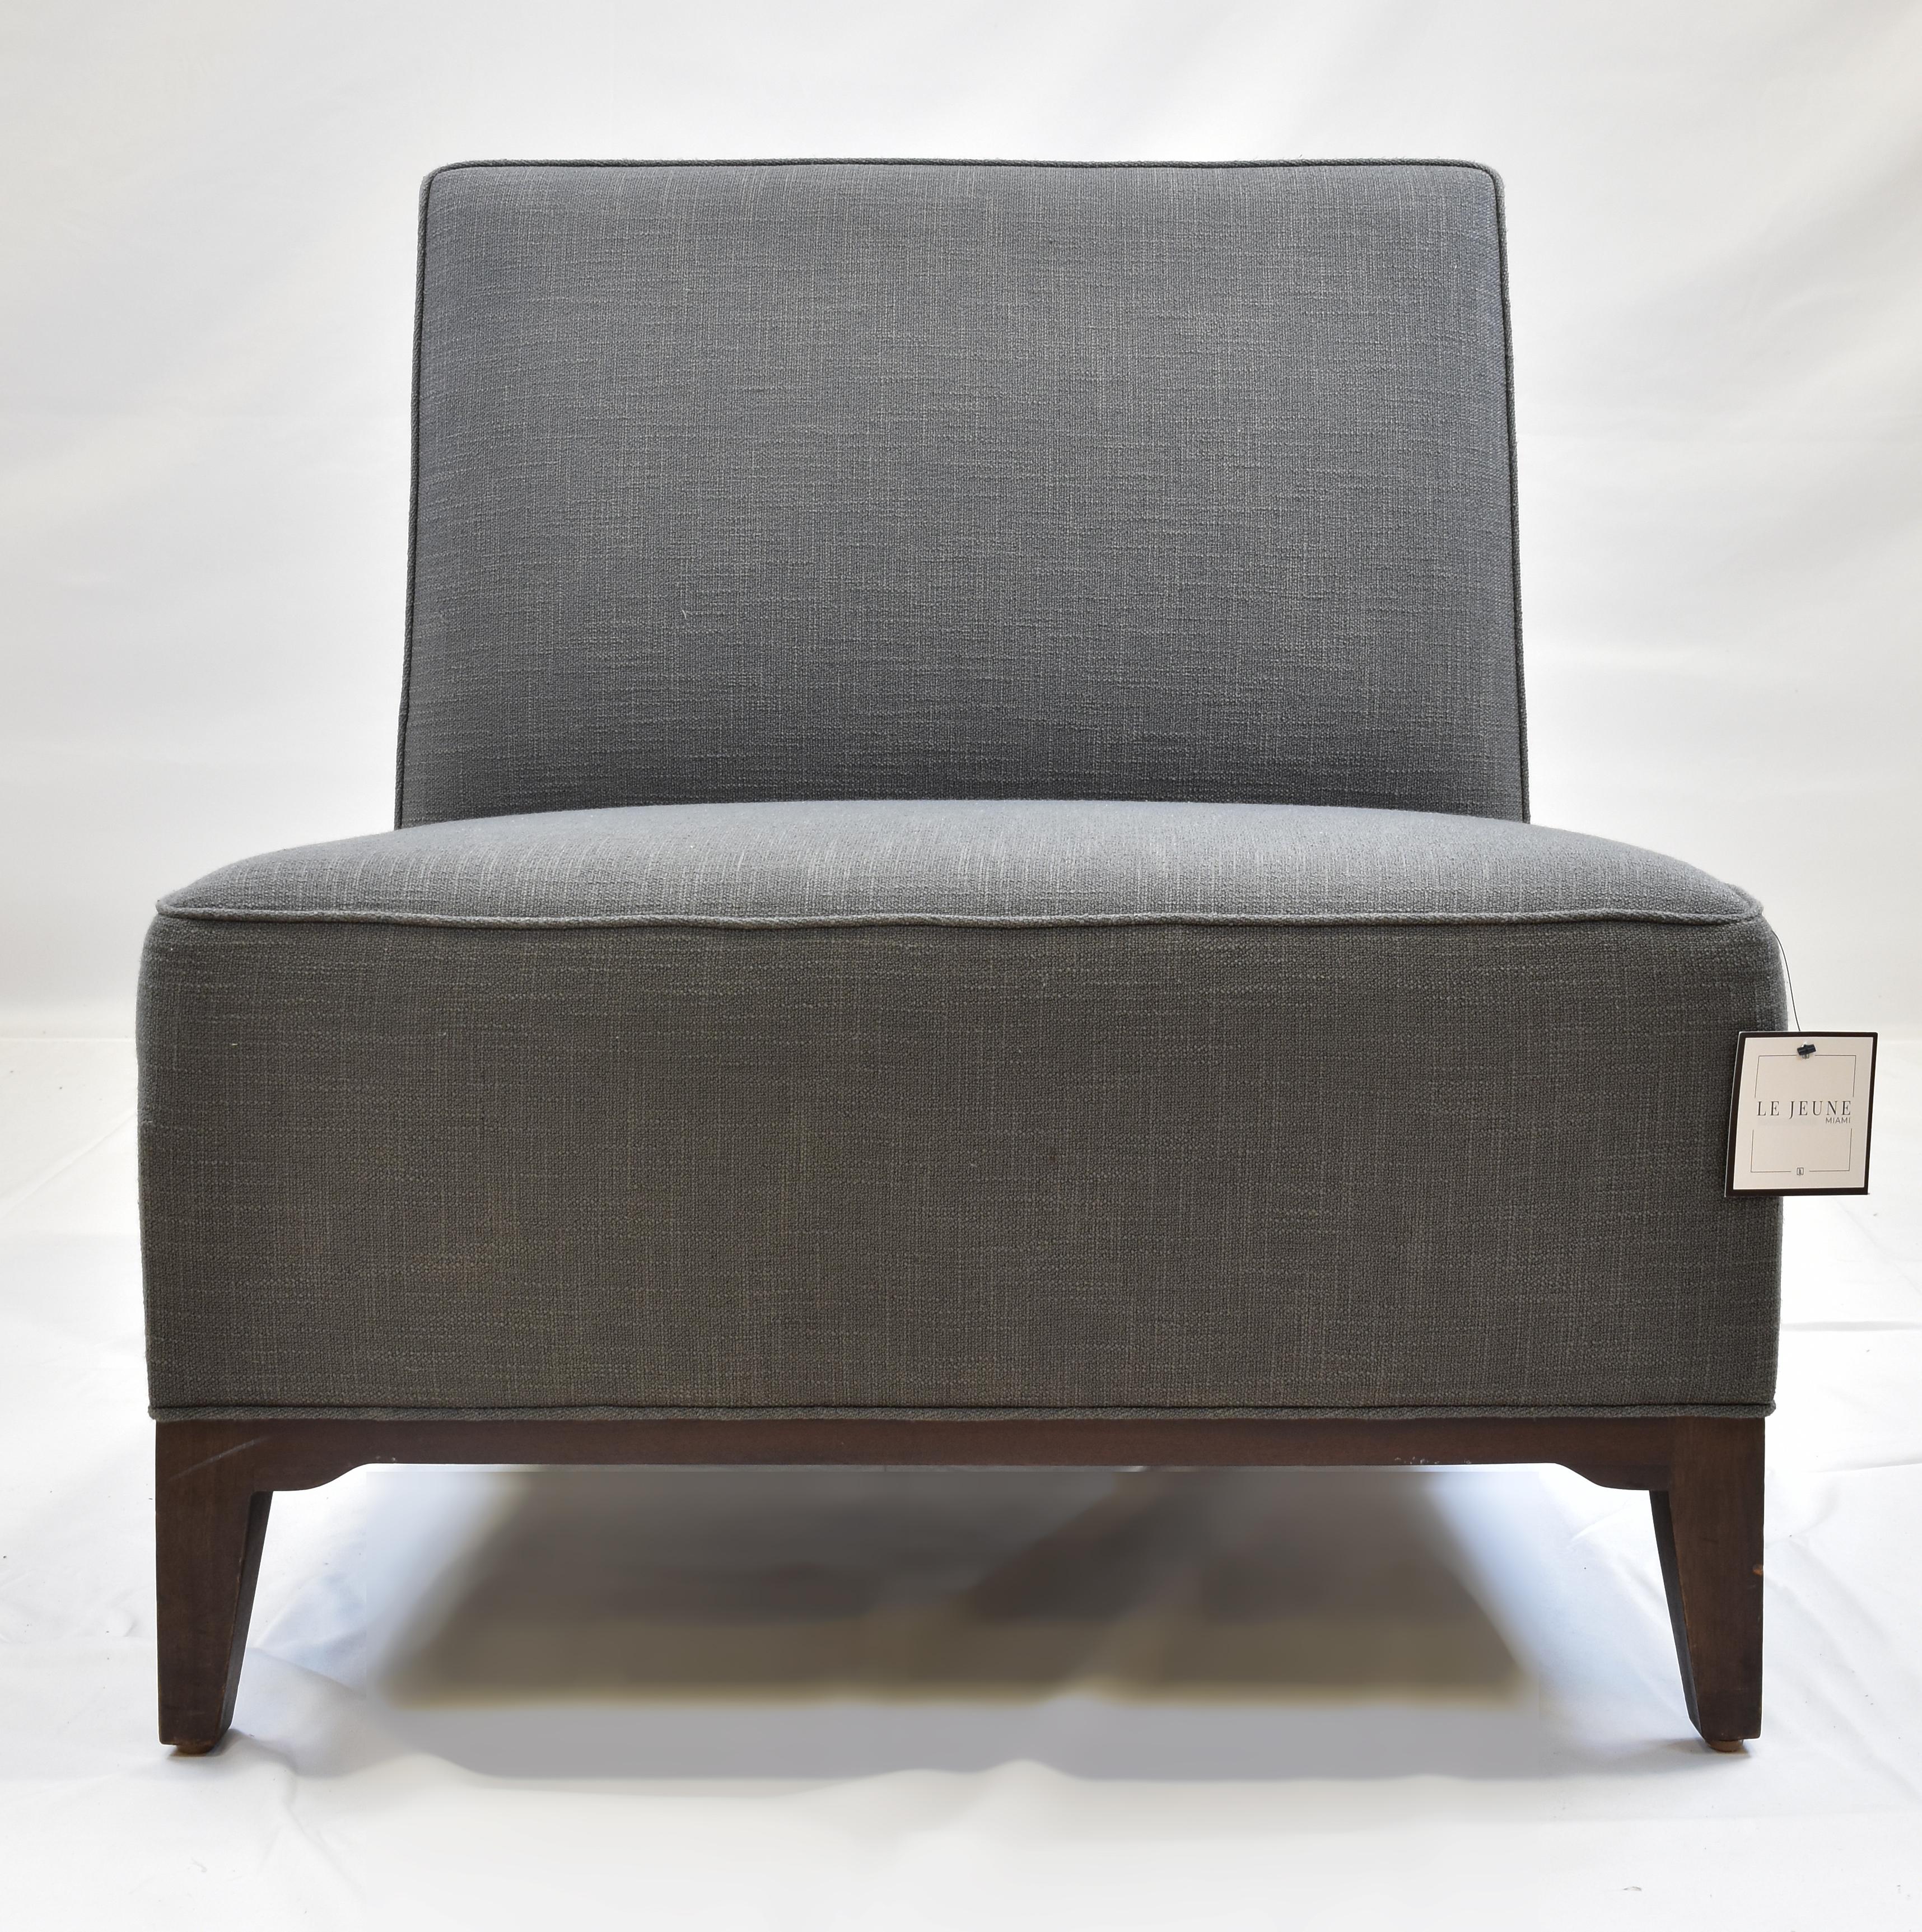 Le Jeune Upholstery Loft Slipper Chair Showroom Model

Offered for sale is a Le Jeune Upholstery LOFT	C6.932 Slipper Chair Showroom Model. This	slipper chair is medium-scaled with a tight seat and back sitting style. It has a walnut wood base and